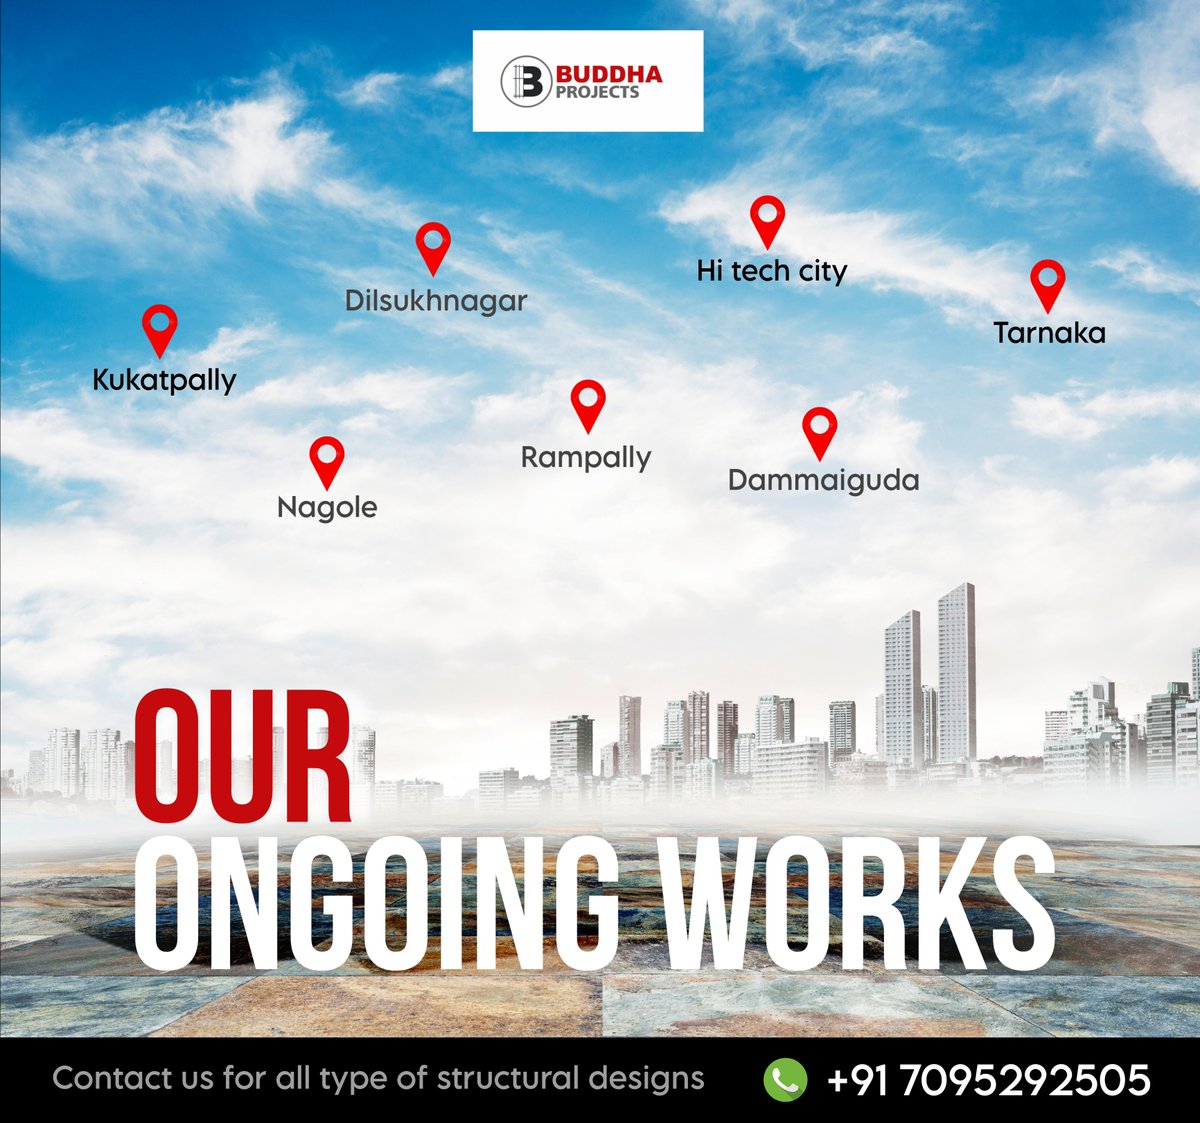 Our OnGoing works over all over #Hyderabad . contact for us all types of Structural Designs.

buddhaprojects.in

Er. Raja Gowtham
      7095292505

#buddhaprojects #Gowtham #Hyderabad #Telangana #structuraldesigns 
#constructioncompany